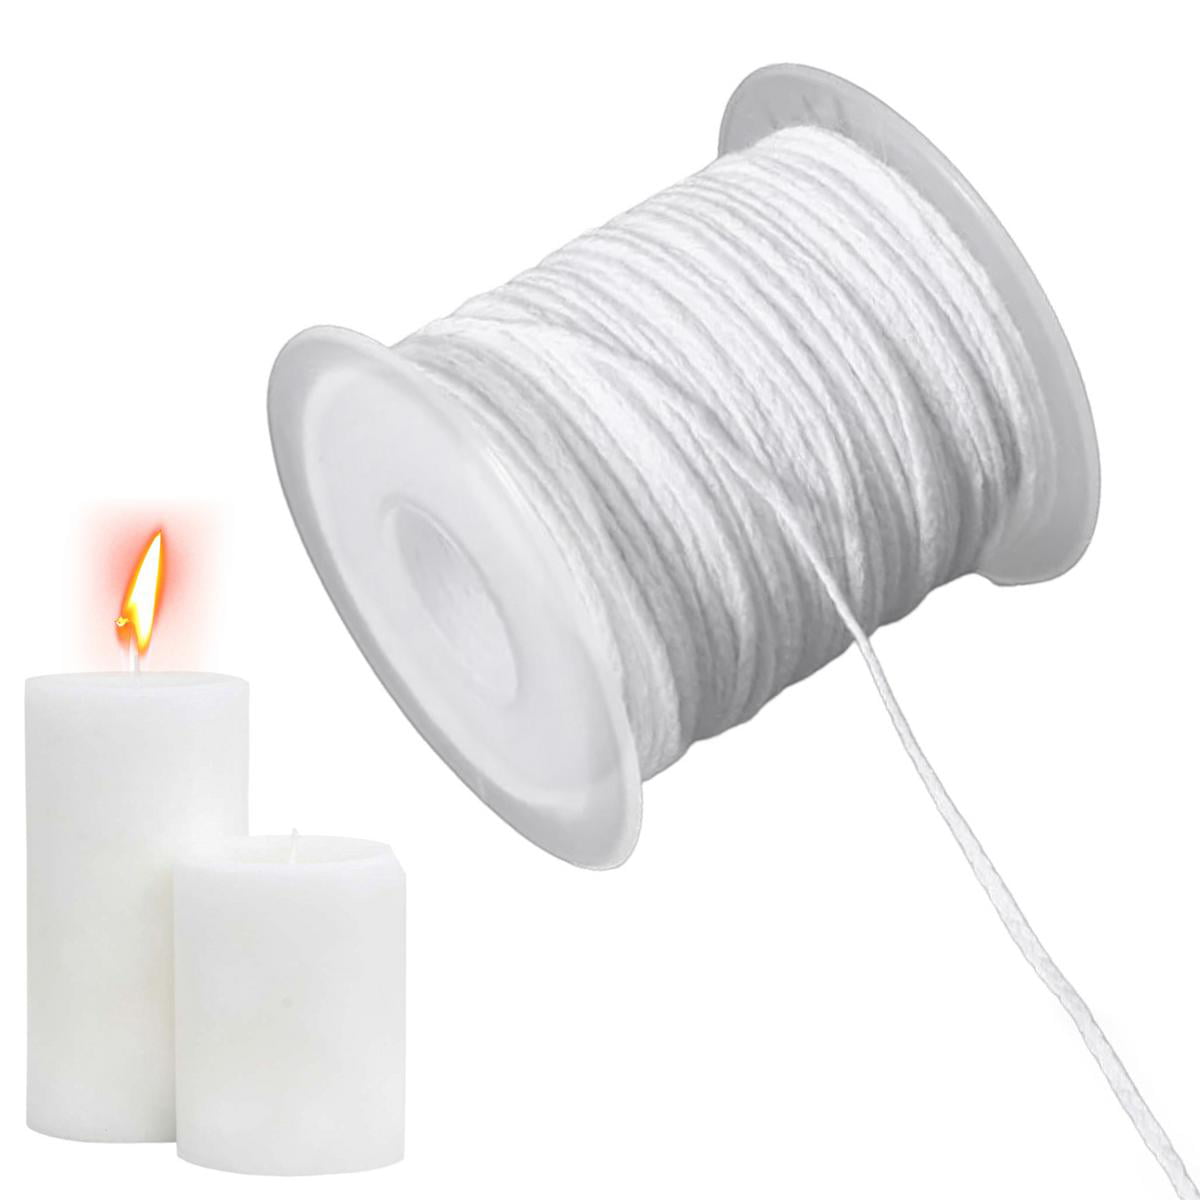 150 pcs 6 Inch Candle Wick Natural Cotton Low Smoke Candle Wick with 50 Metal Tabs for Candle Making,Candle DIY 